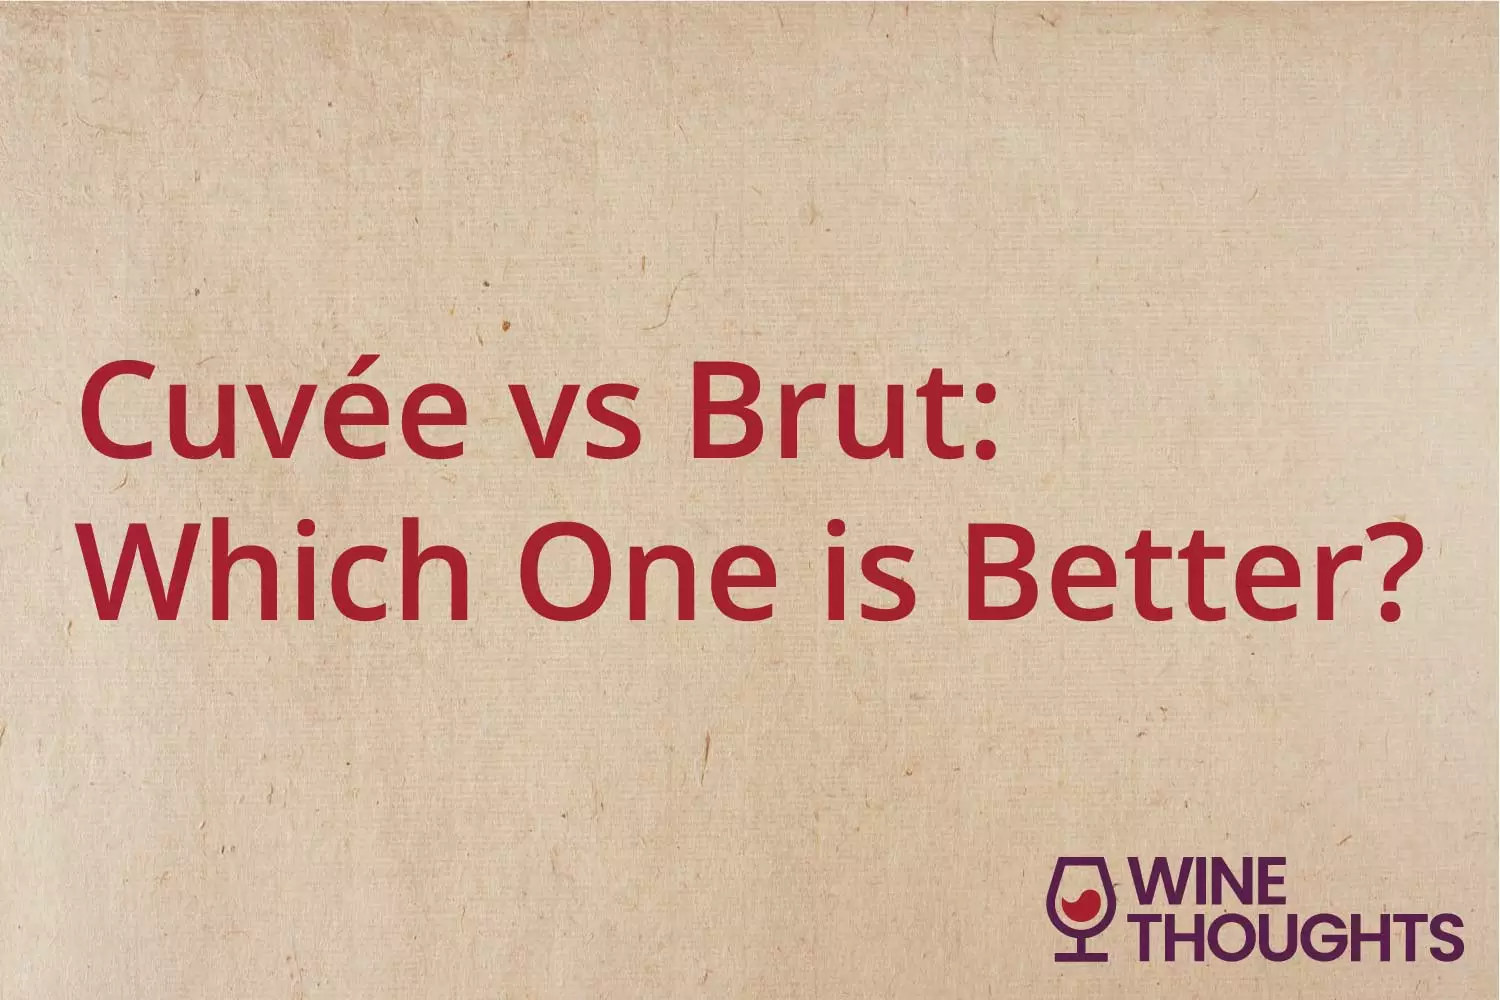 Cuve vs brutt which one is better?.